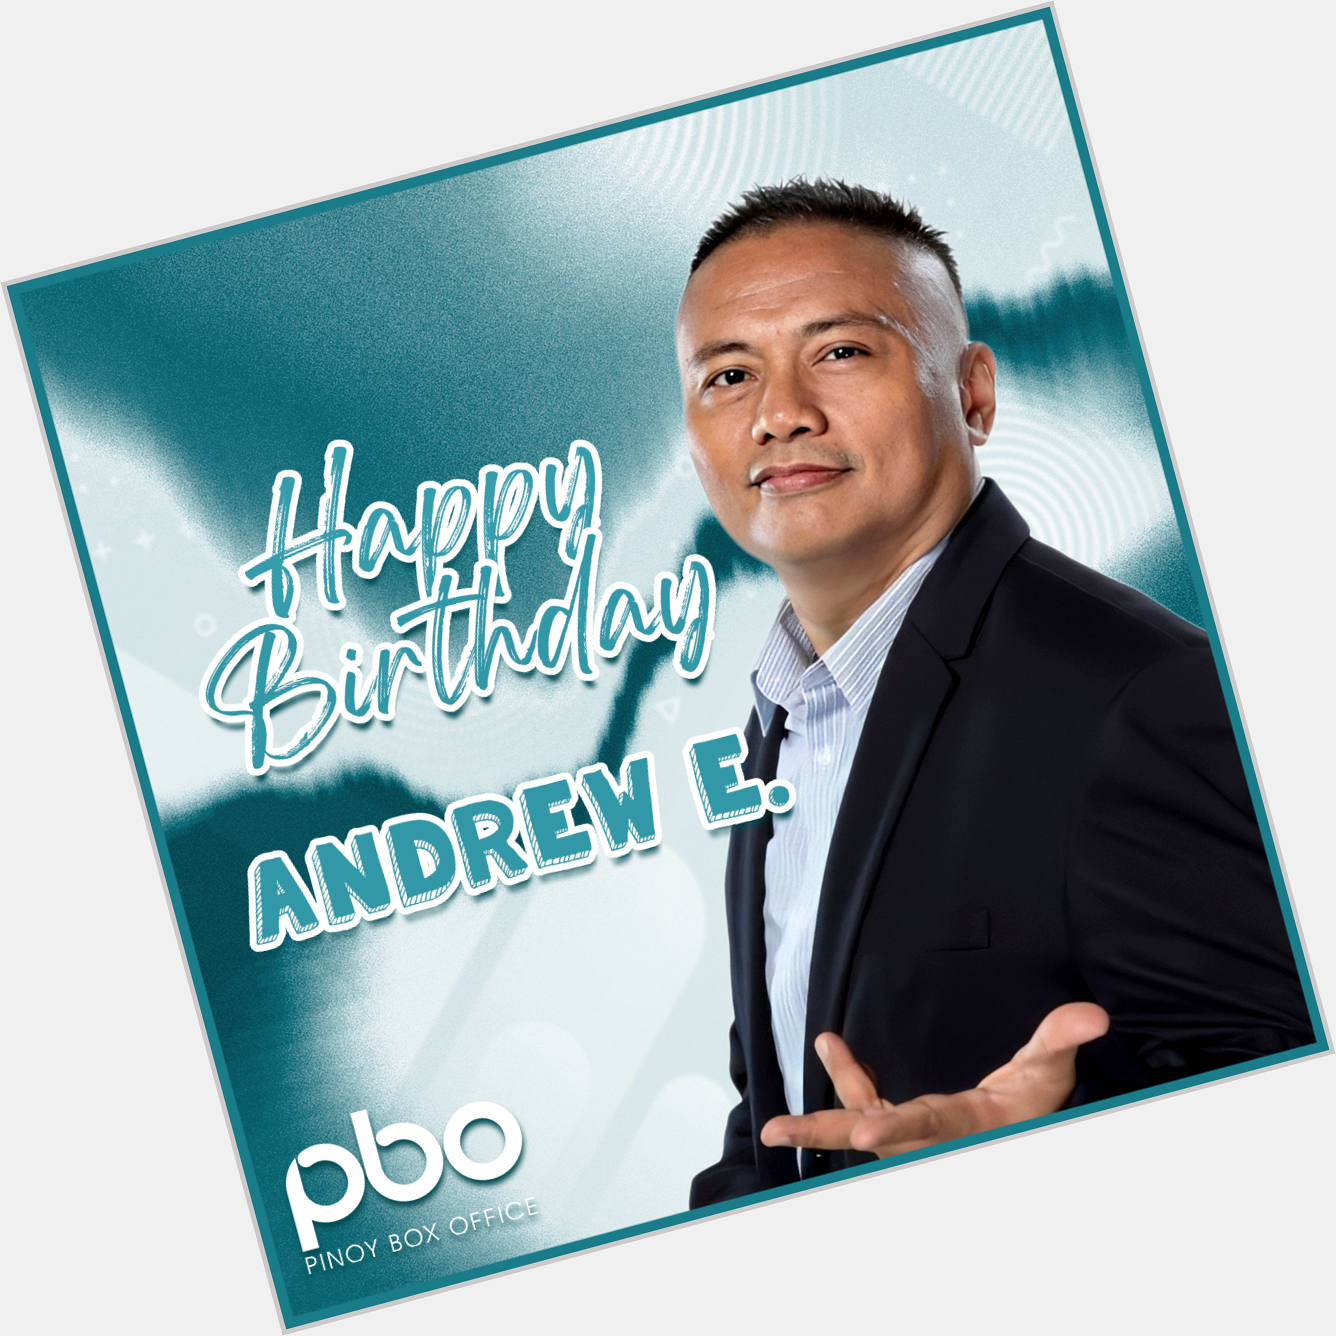 Happy birthday to our favorite, Andrew E.! All the love and support from your PBO family! 